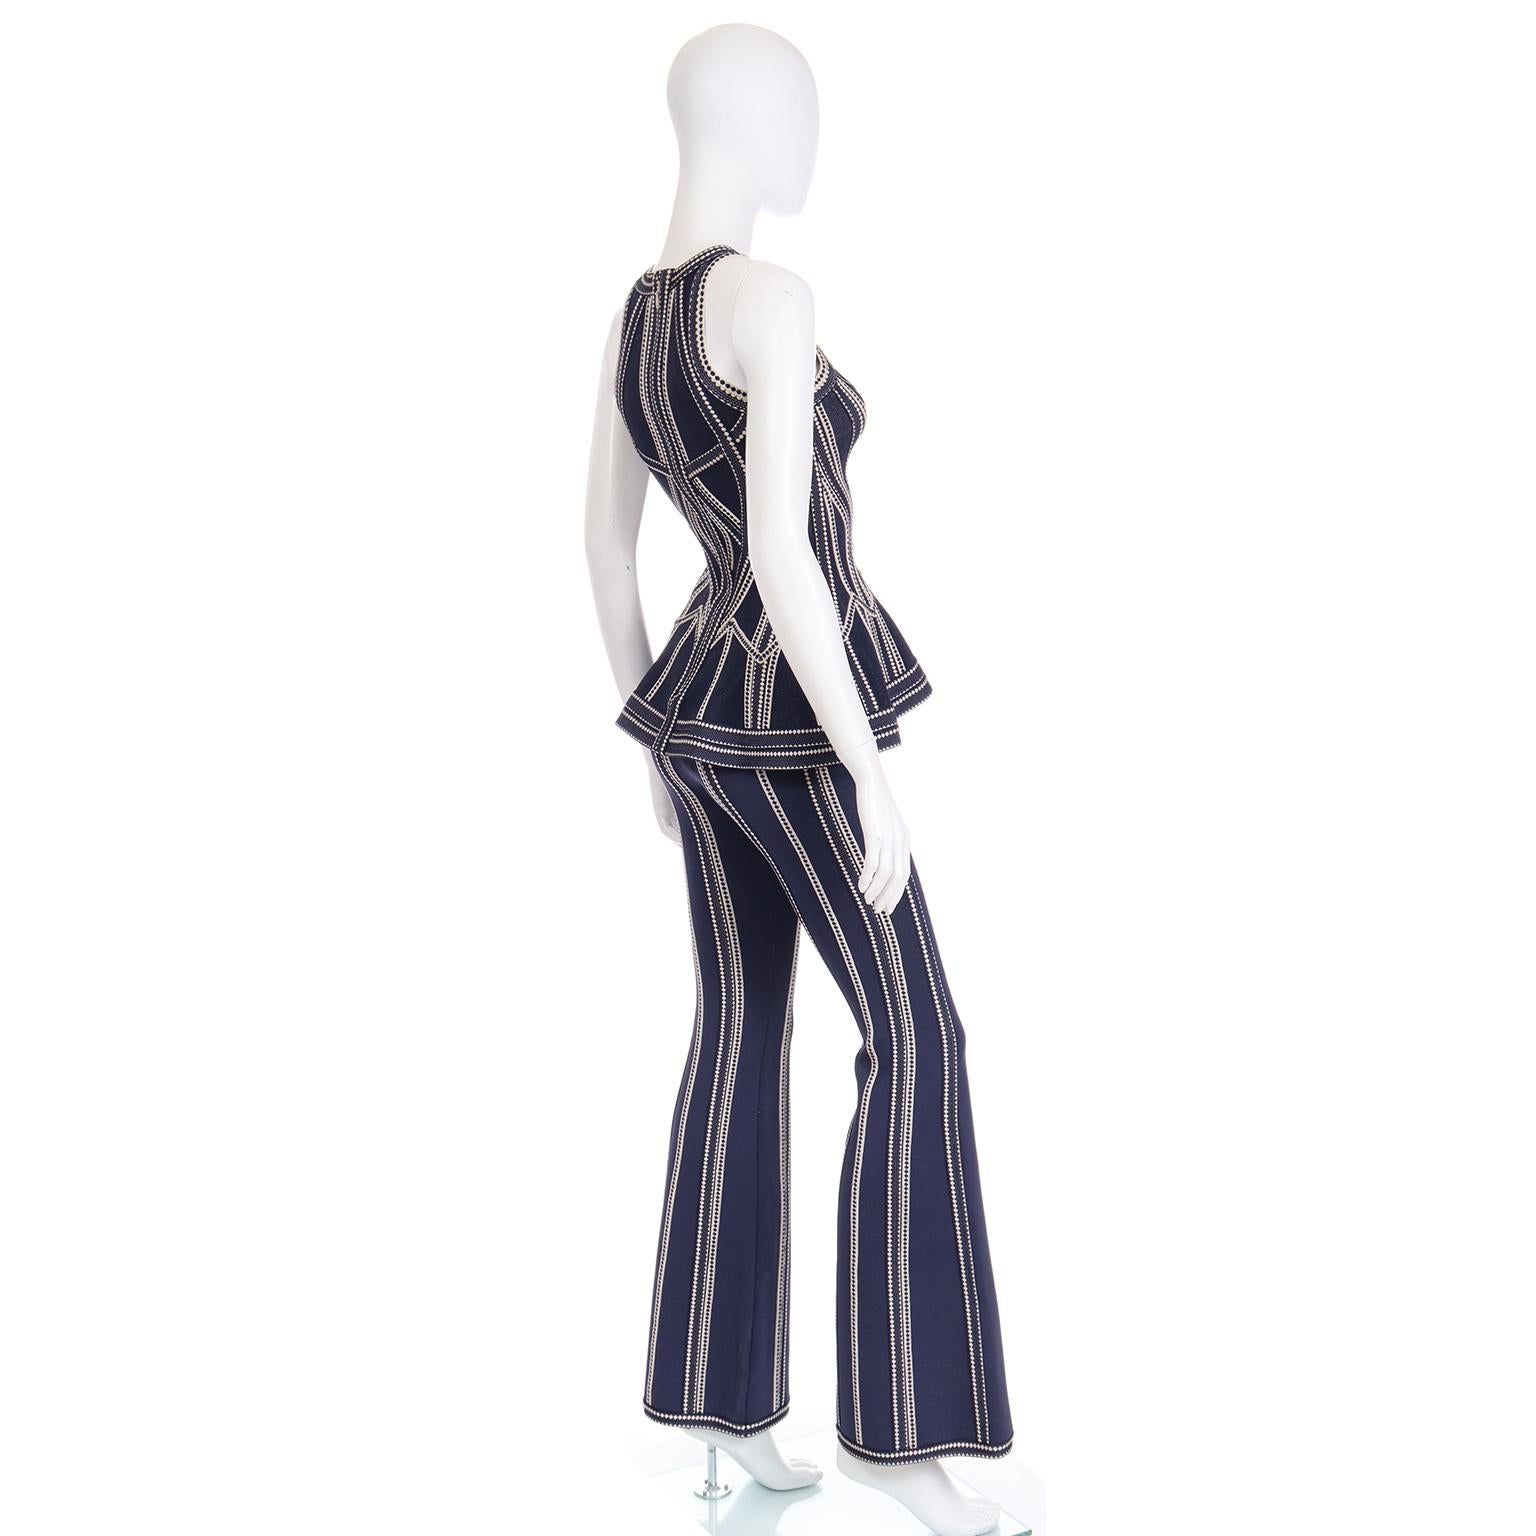 2016 Herve Leger Vintage Blue and White Flared Pants & Cutout Top Runway Outfit In Excellent Condition For Sale In Portland, OR